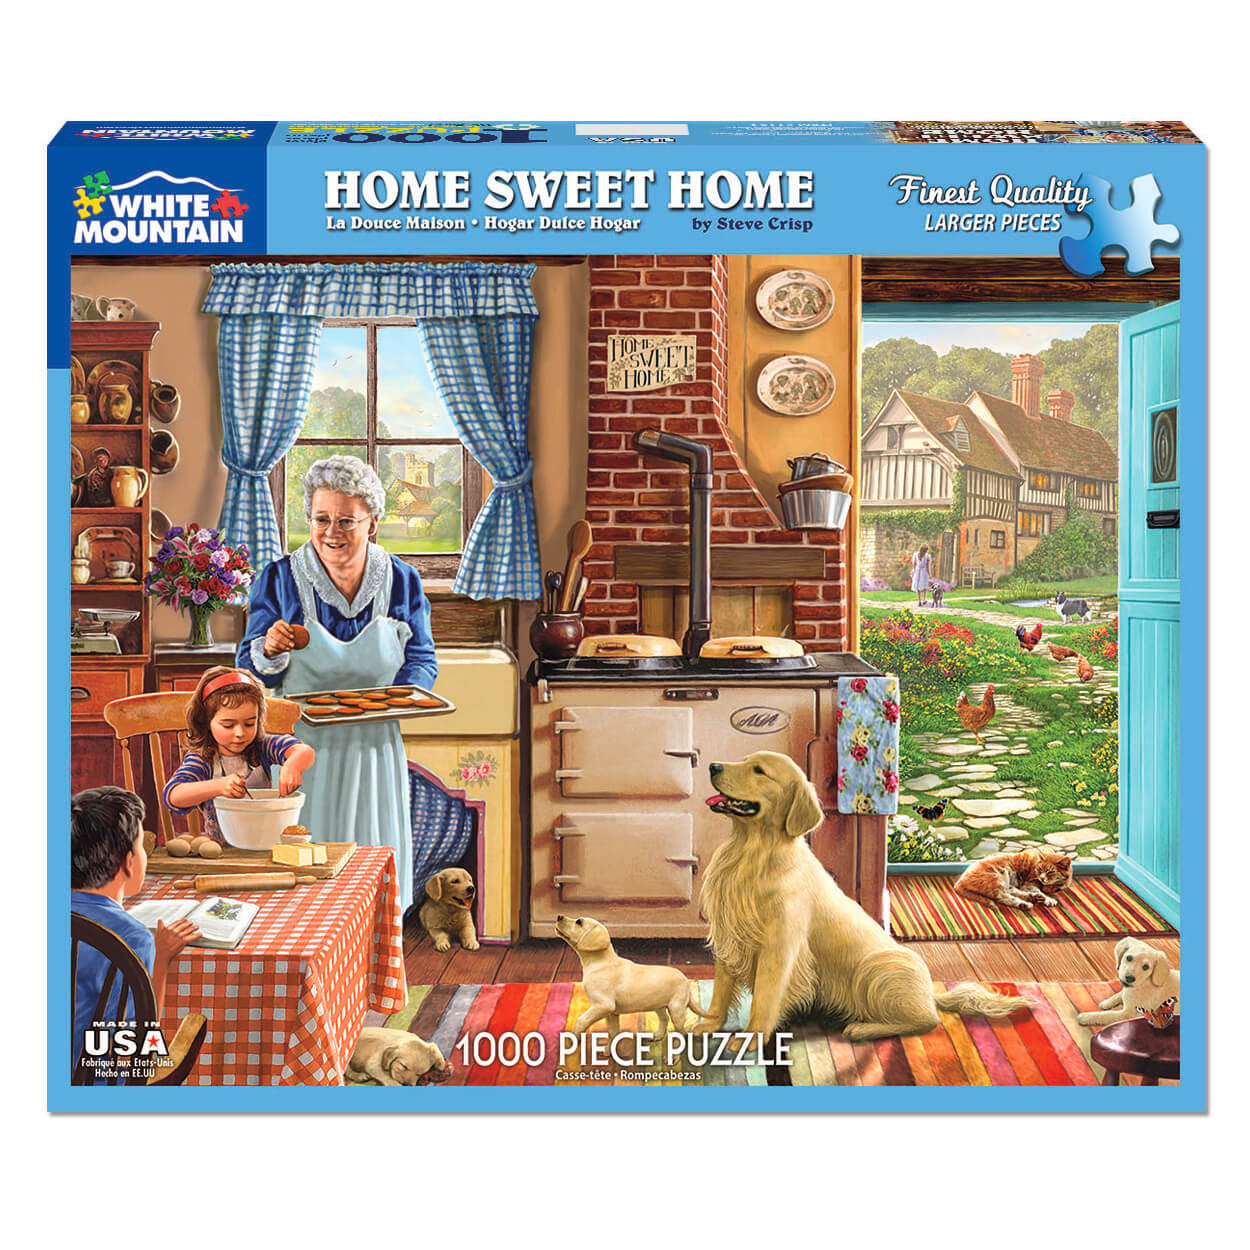 White Mountain Puzzles Home Sweet Home 1000 Piece Jigsaw Puzzle